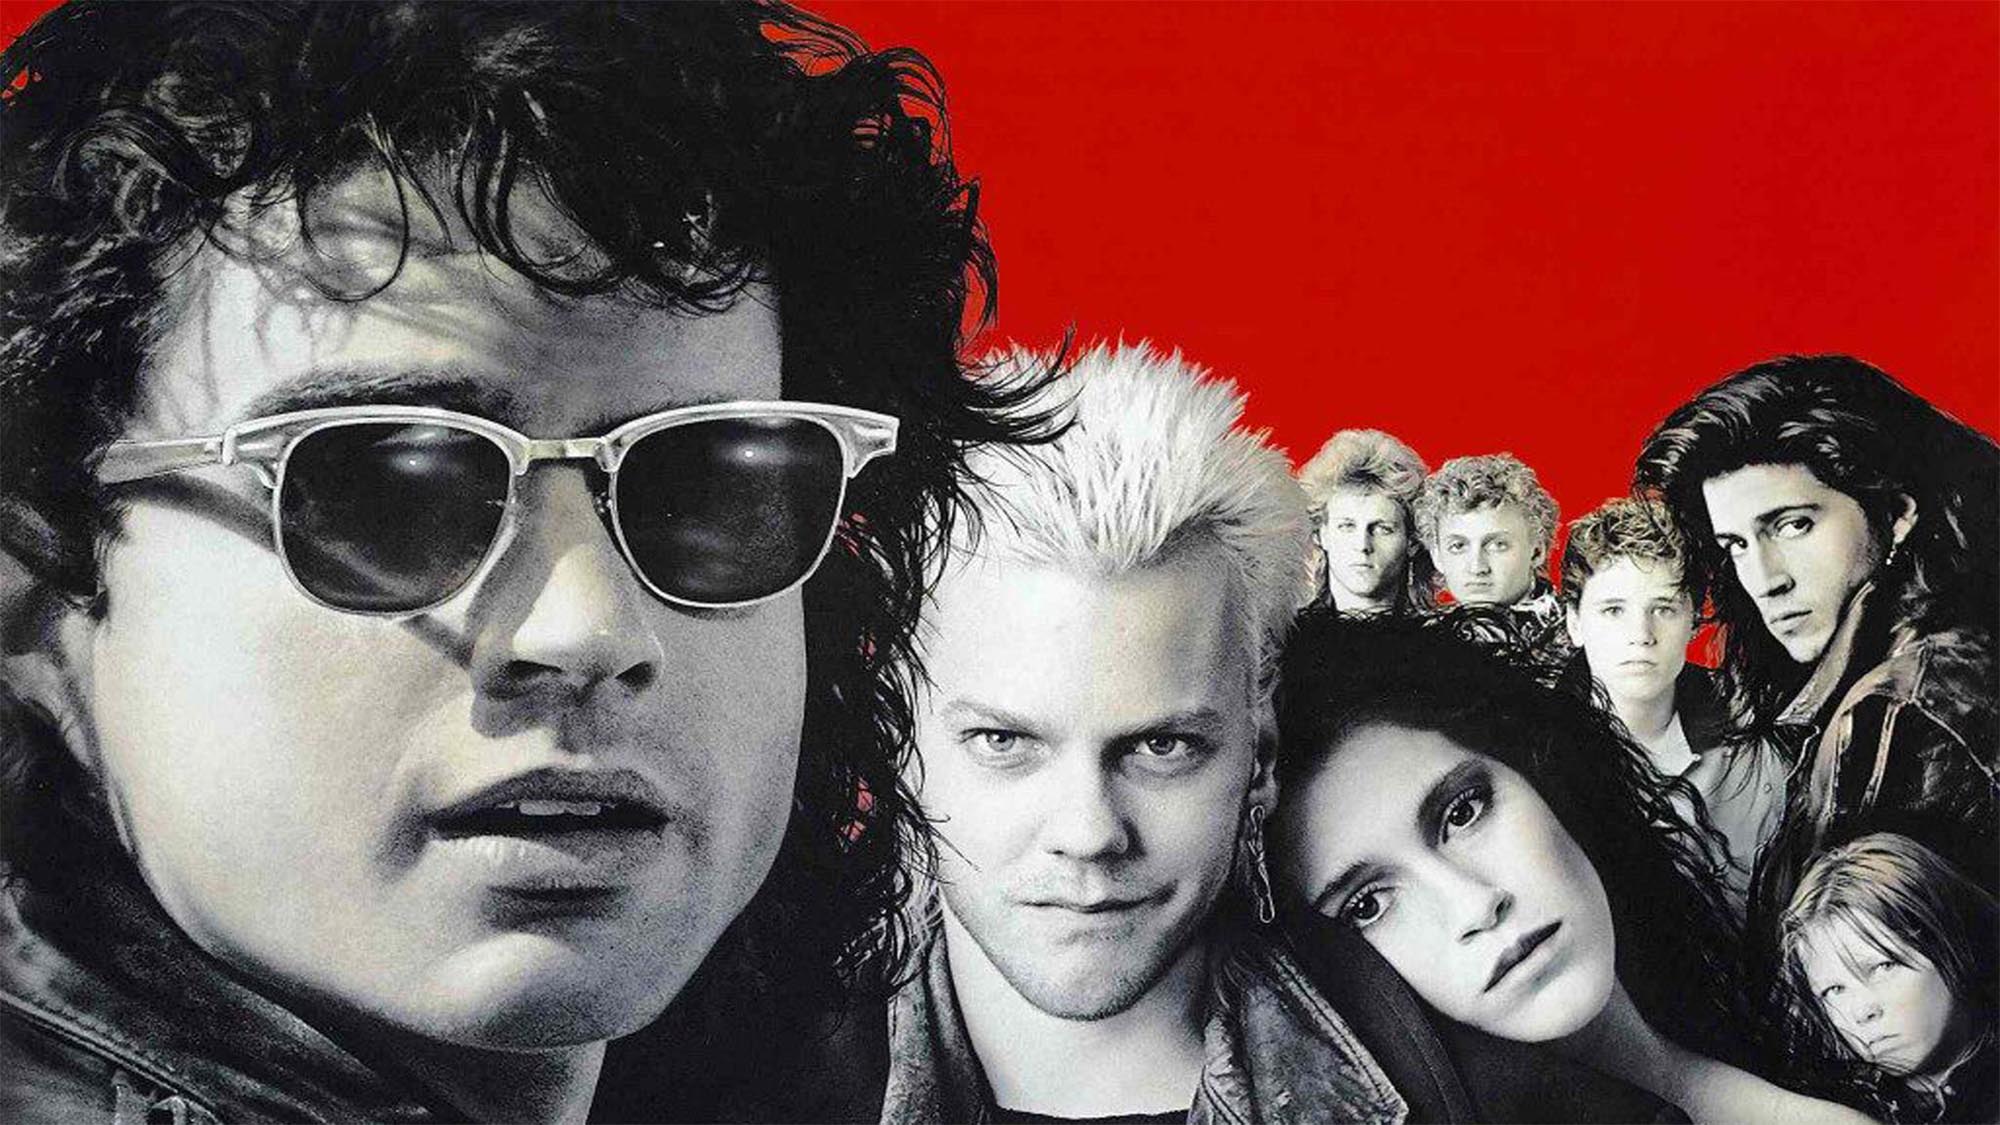 Nostalgia reigns supreme. Check out the best 80s movies you can watch on streaming services.